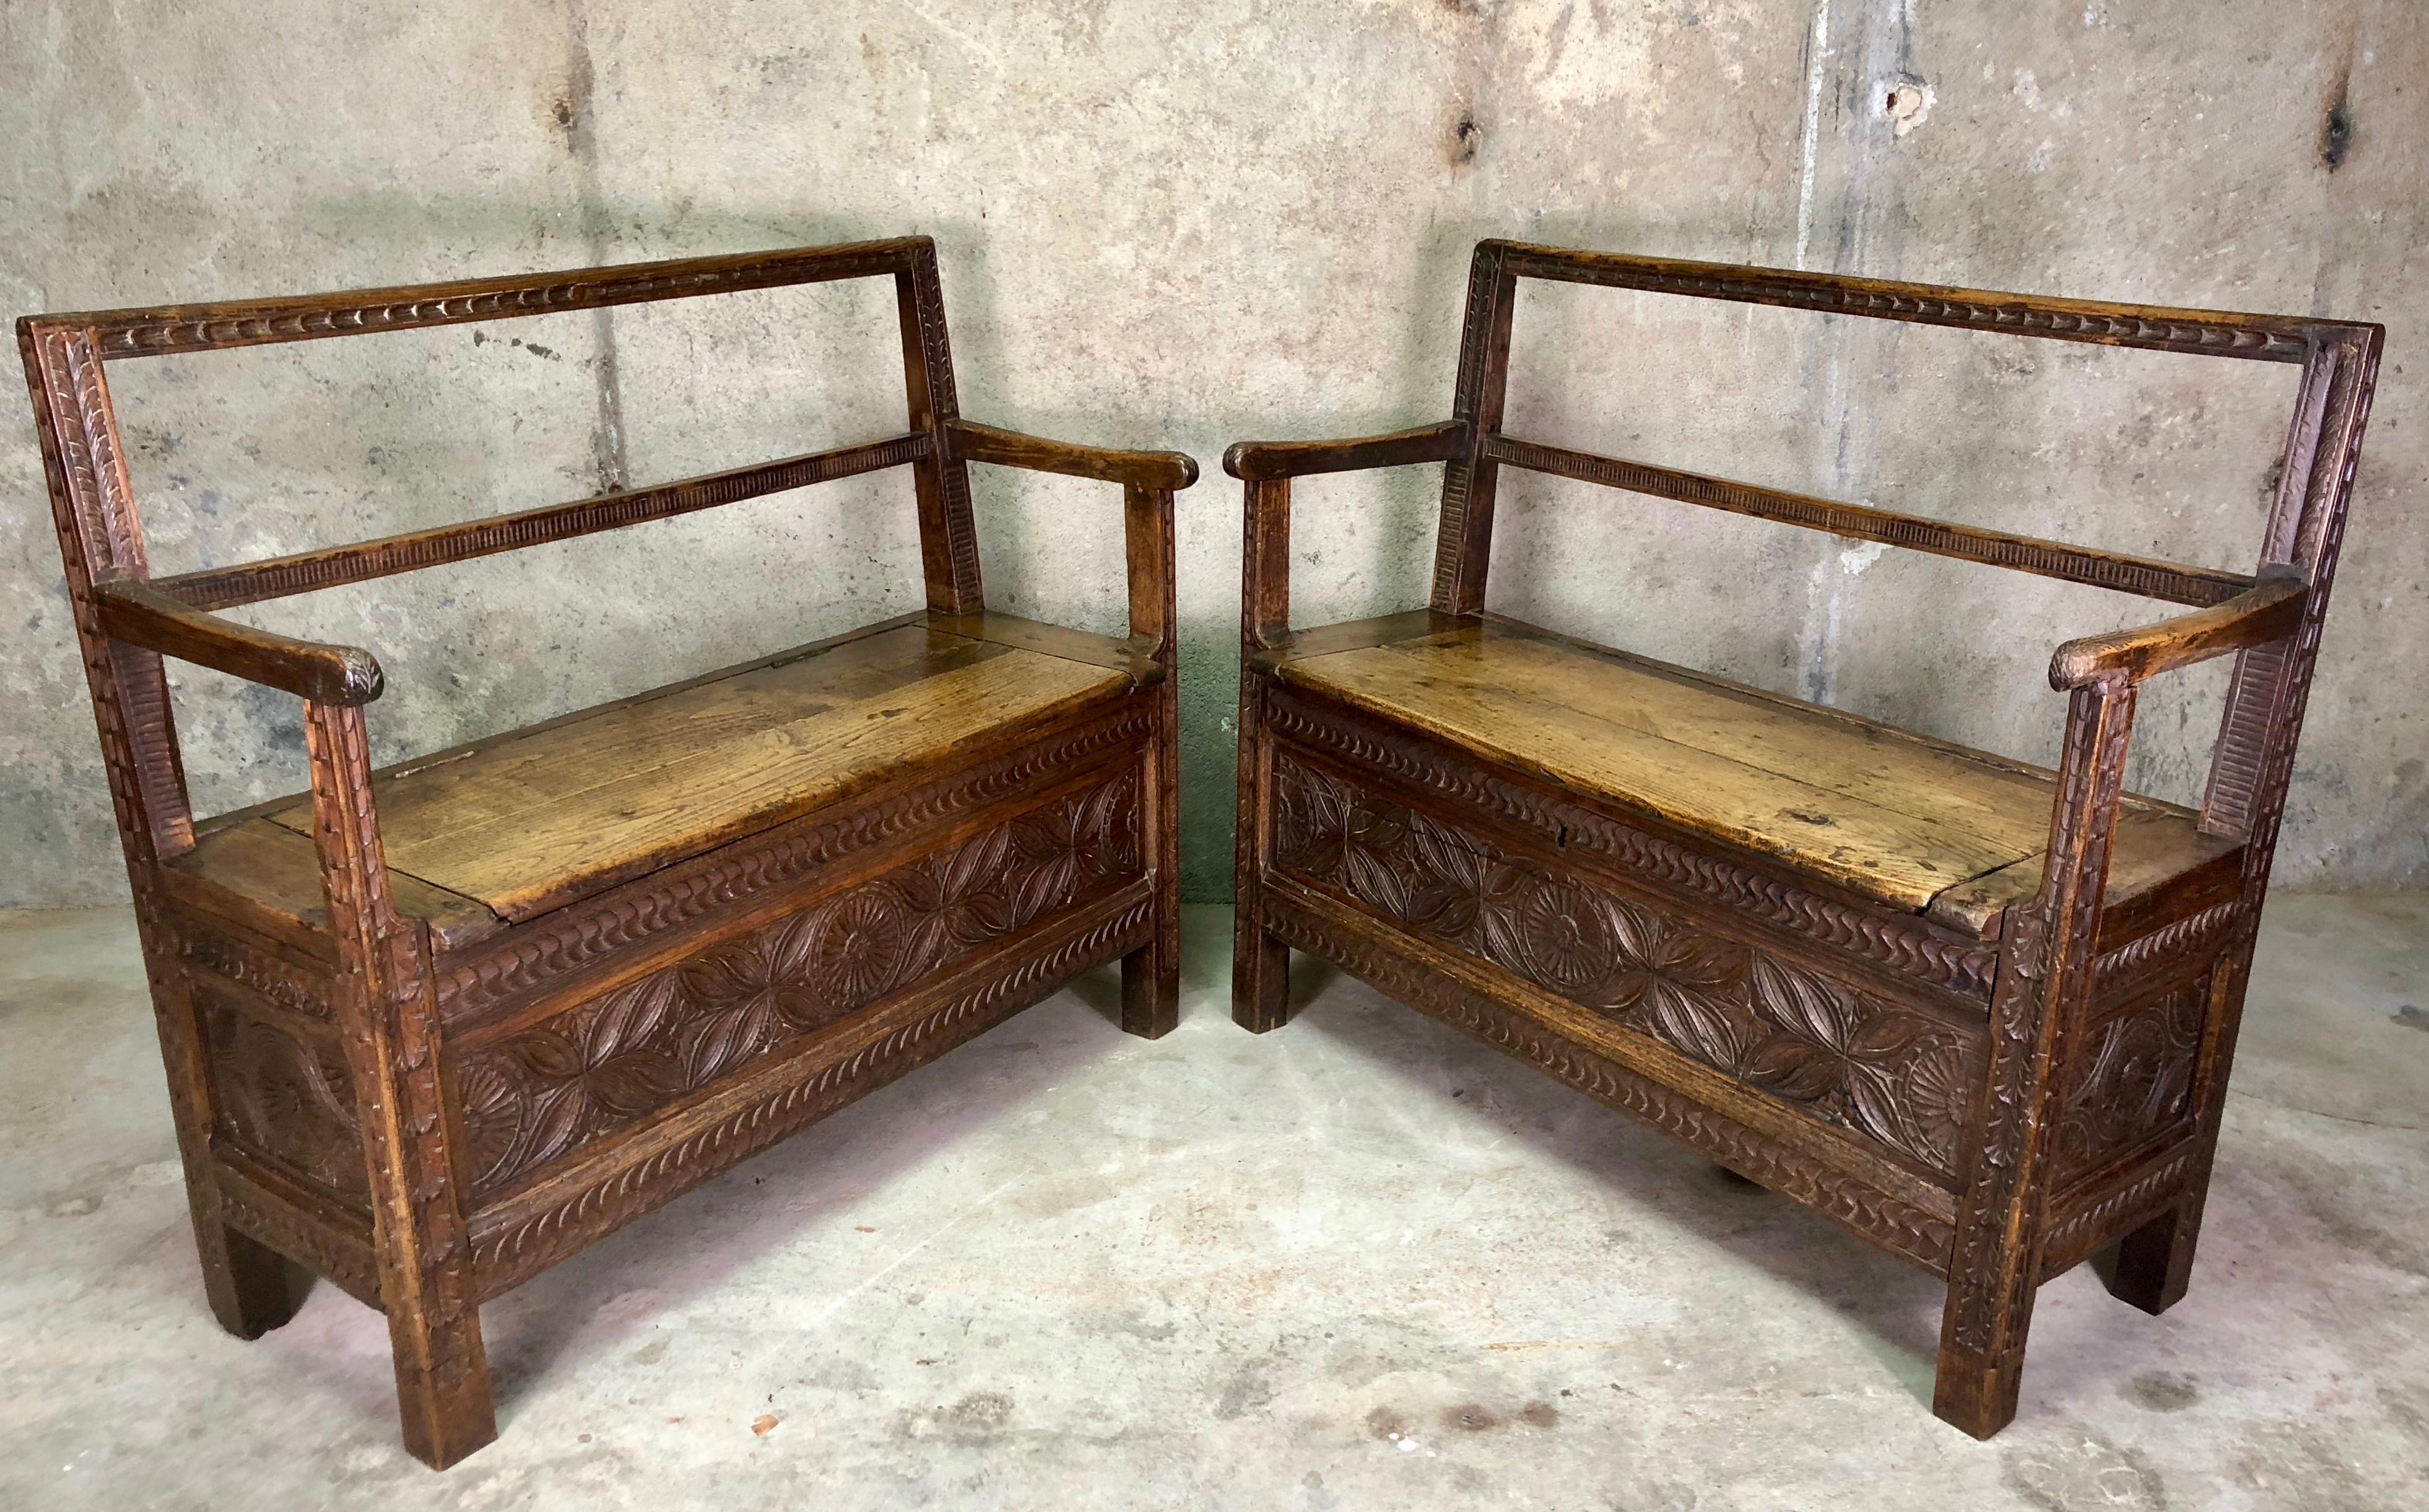 A rare pair of hand-crafted Breton (France) benches with lift up seats to provide storage inside.
They are hand-carved from oak in a typical Breton style with a rustic, country look.
It is rare to find a pair of these benches together in the same